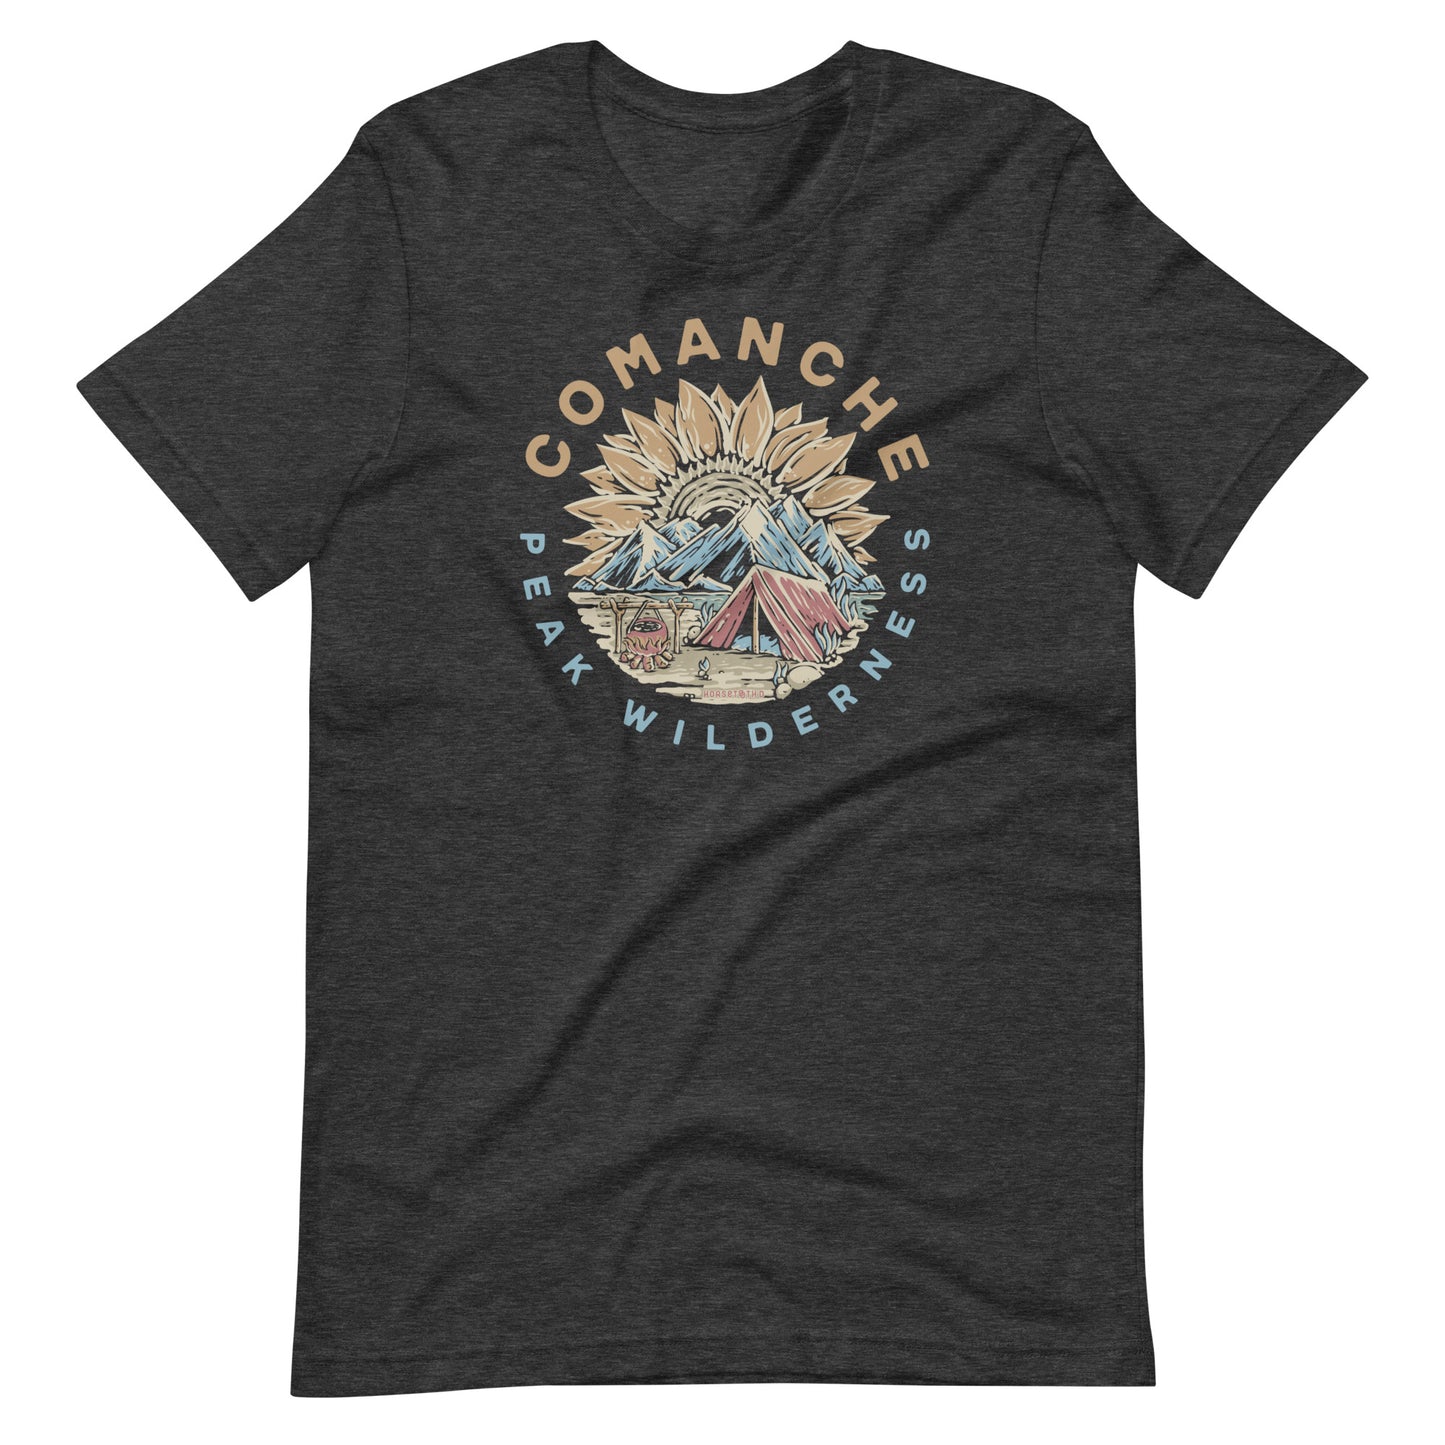 A Heather-colored Bella Canvas 3001 t-shirt with a detailed graphic depicting Comanche Peak Wilderness, designed by Horsetooth'd.